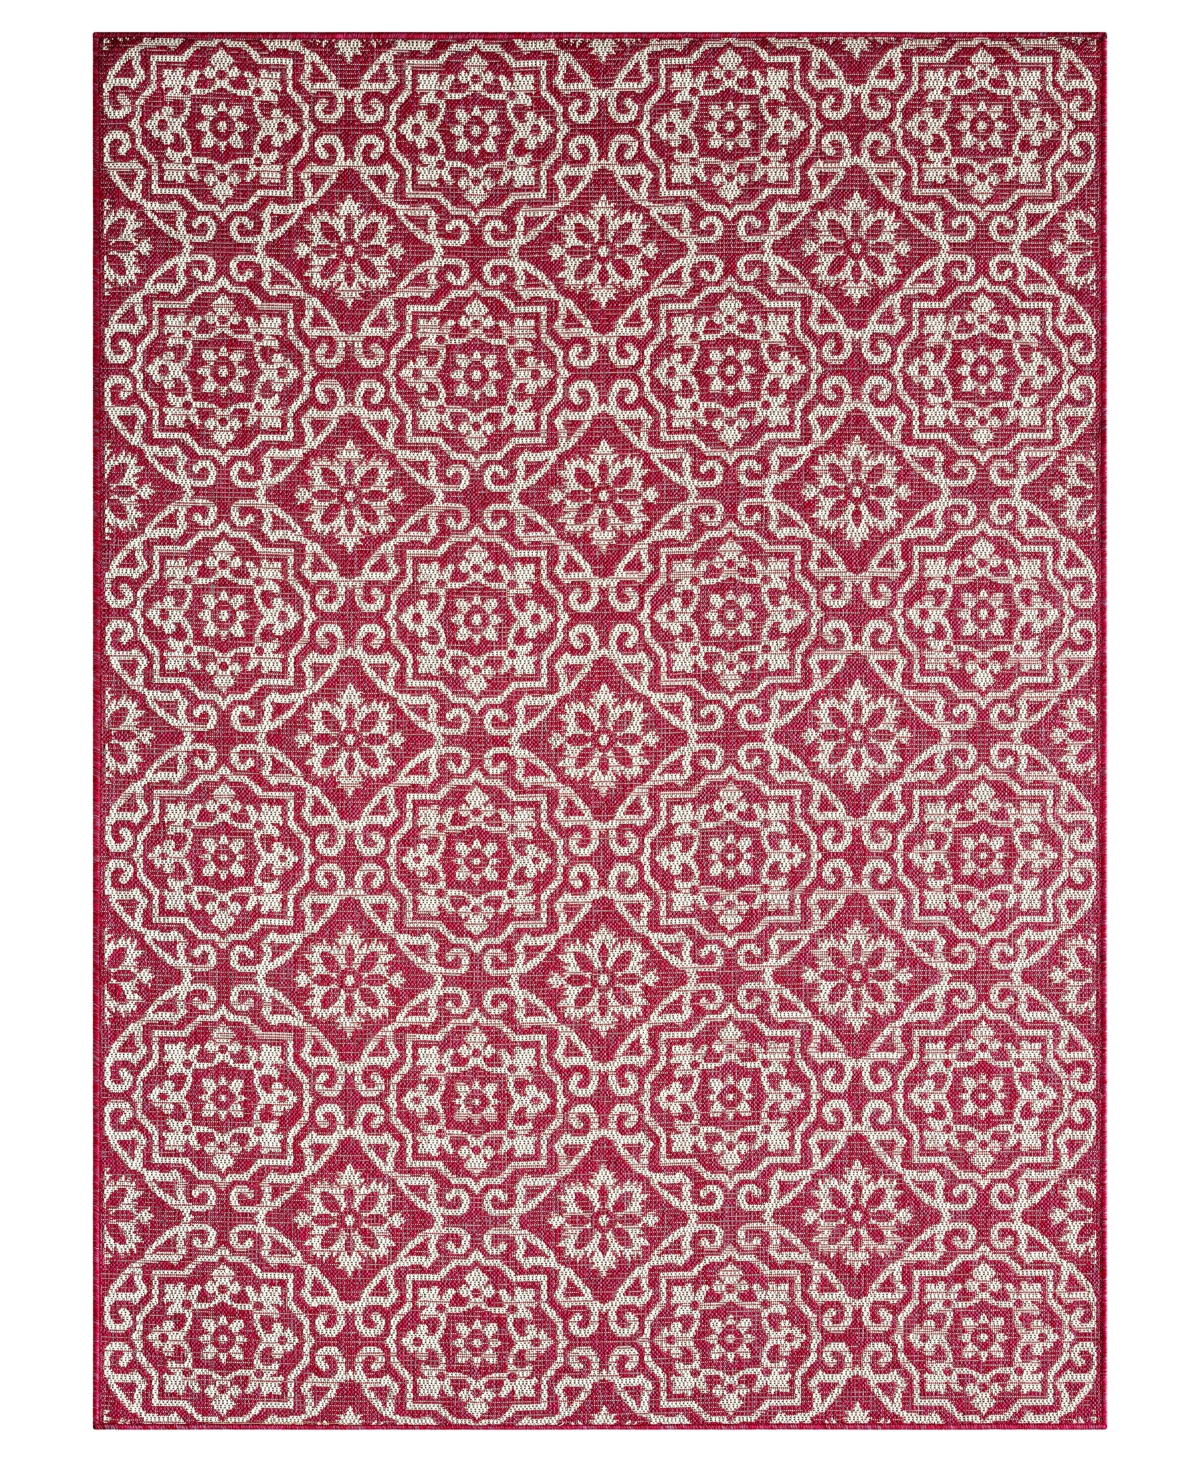 Nicole Miller Patio Country Danica 5'2" X 7'2" Area Rug In Red